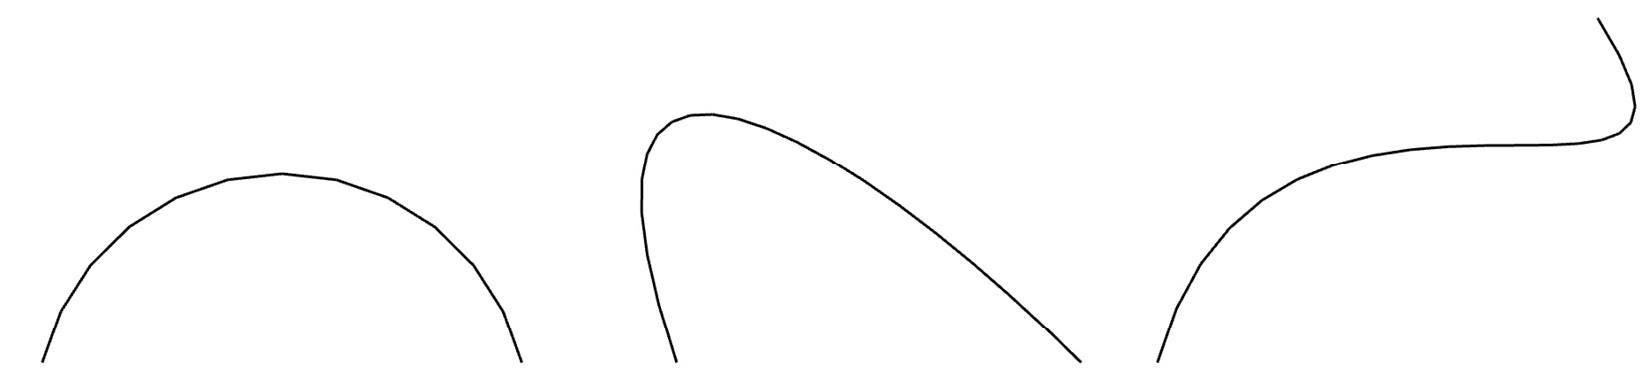 Figure 13.5 – The curve on the left is a standard arc, while the two on the right are Bezier curves
